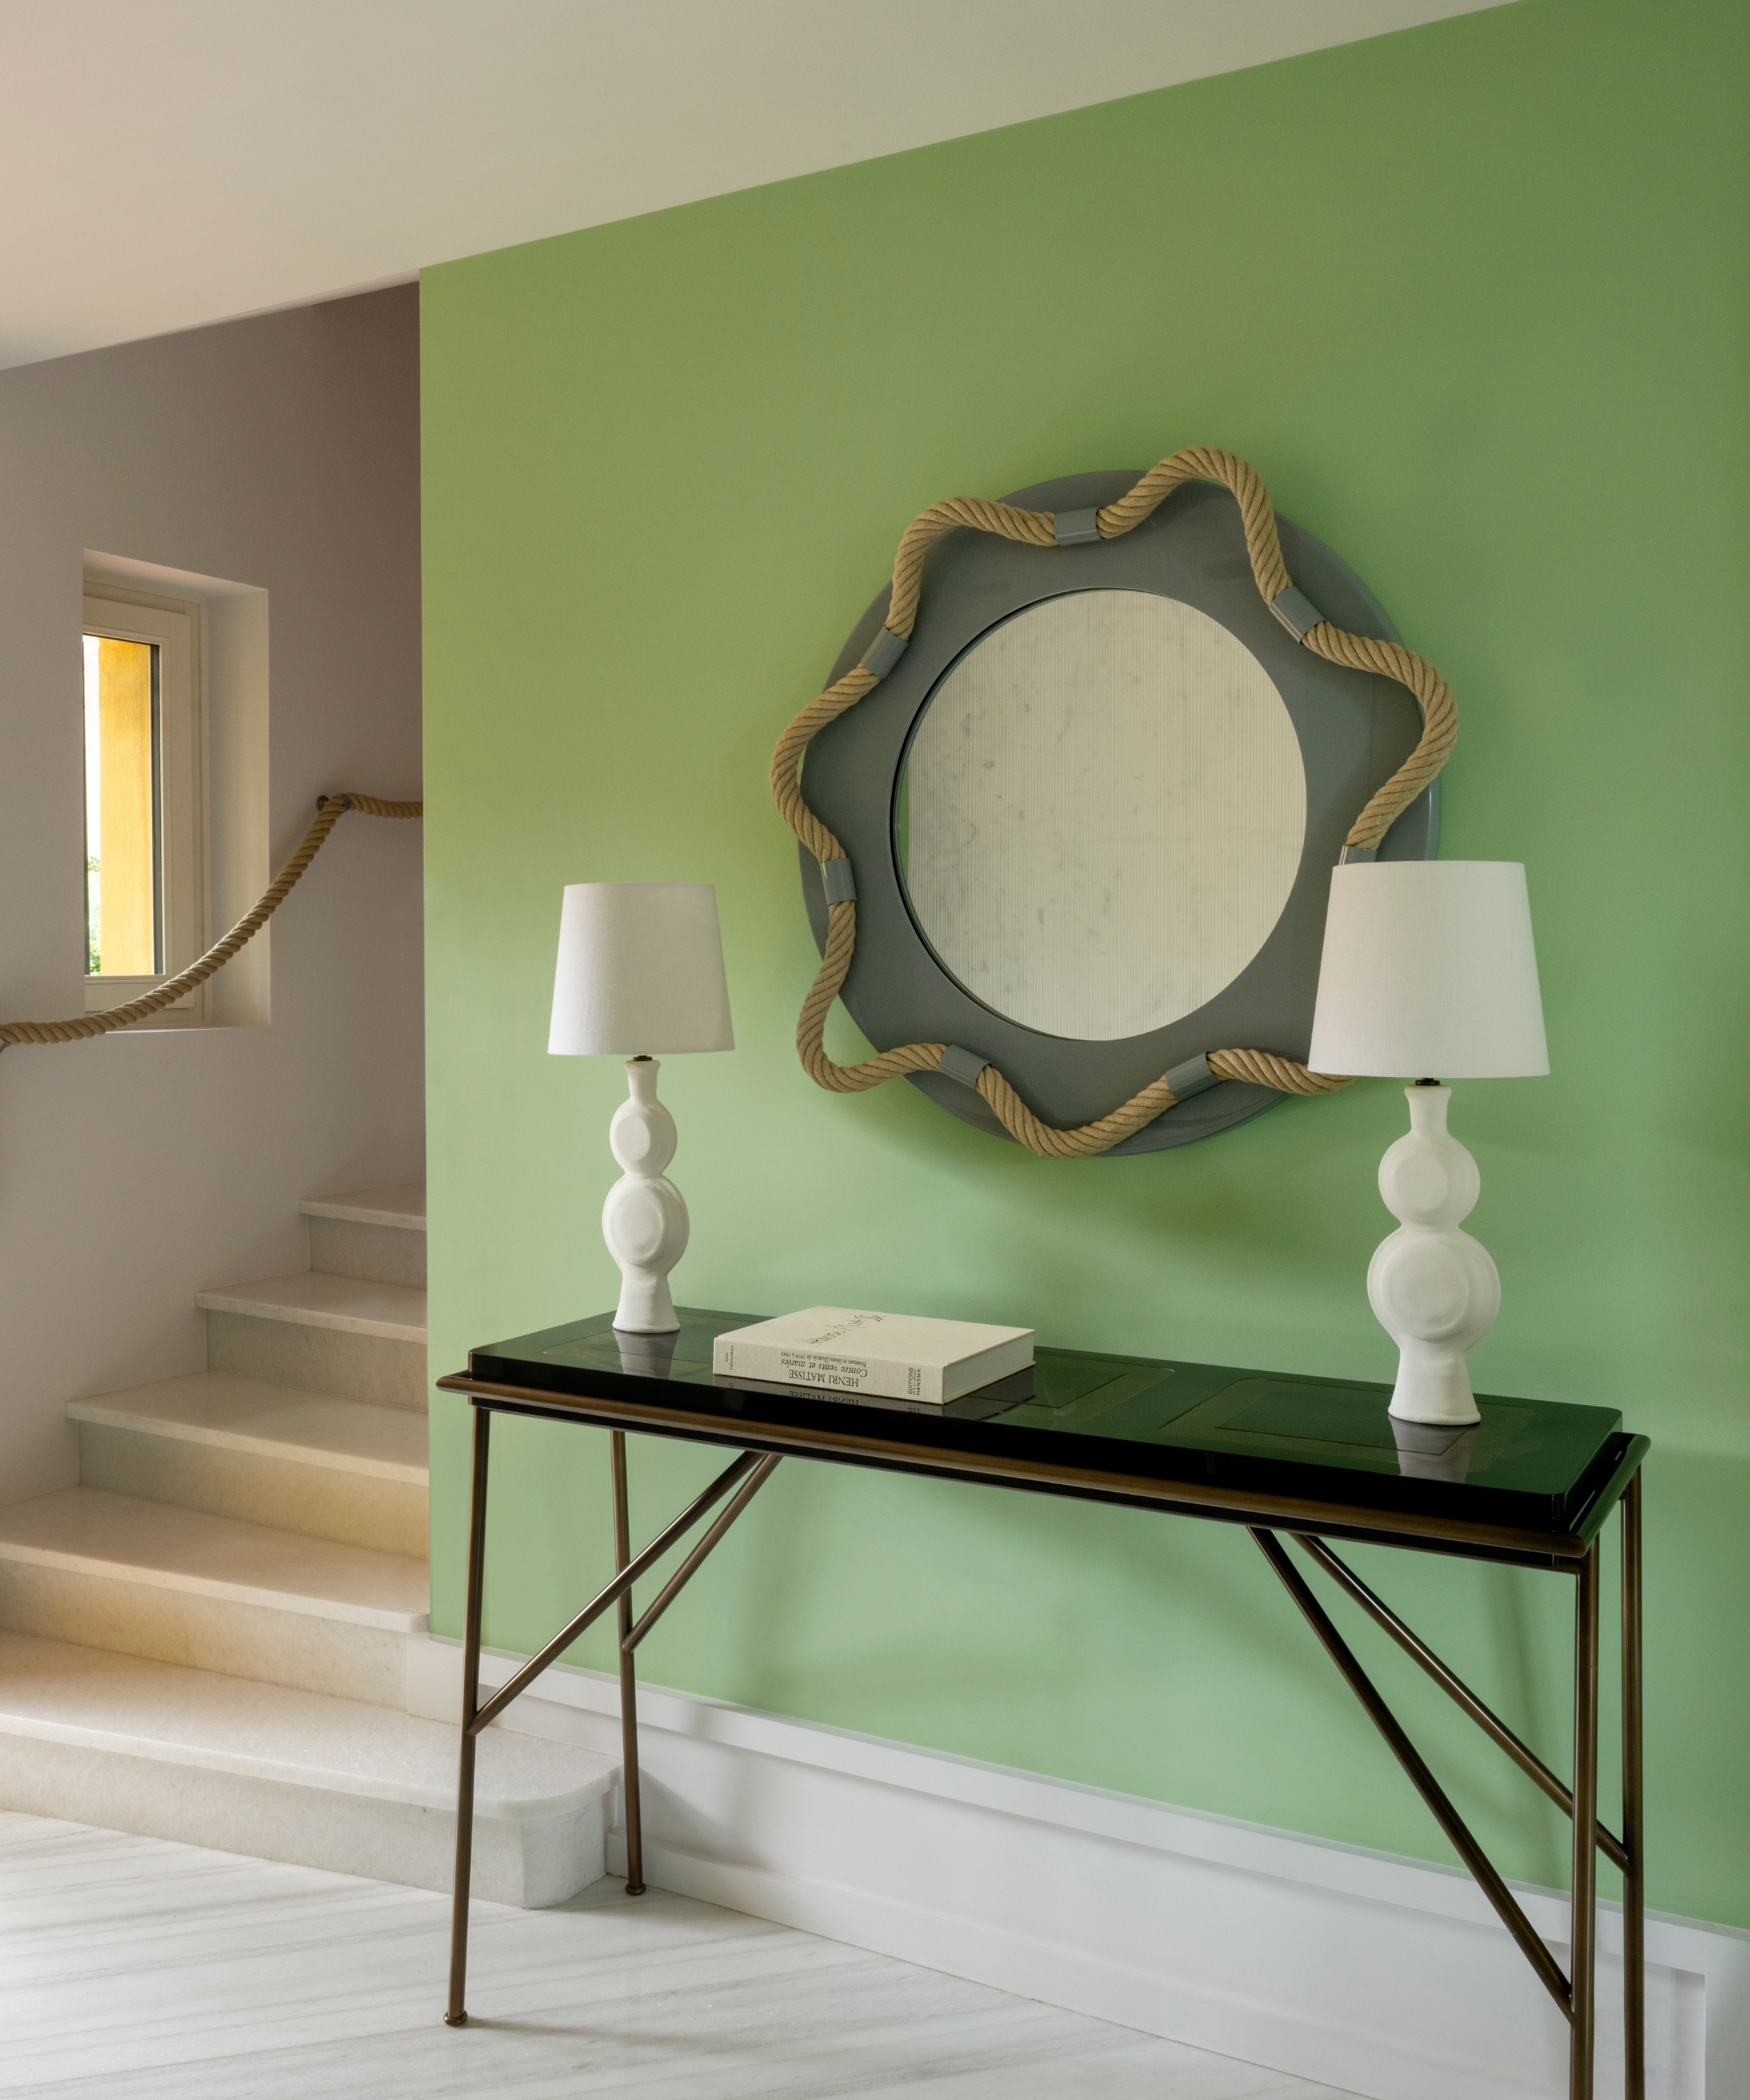 Pea green hallway wall holding accent mirror framed uniquely with rope